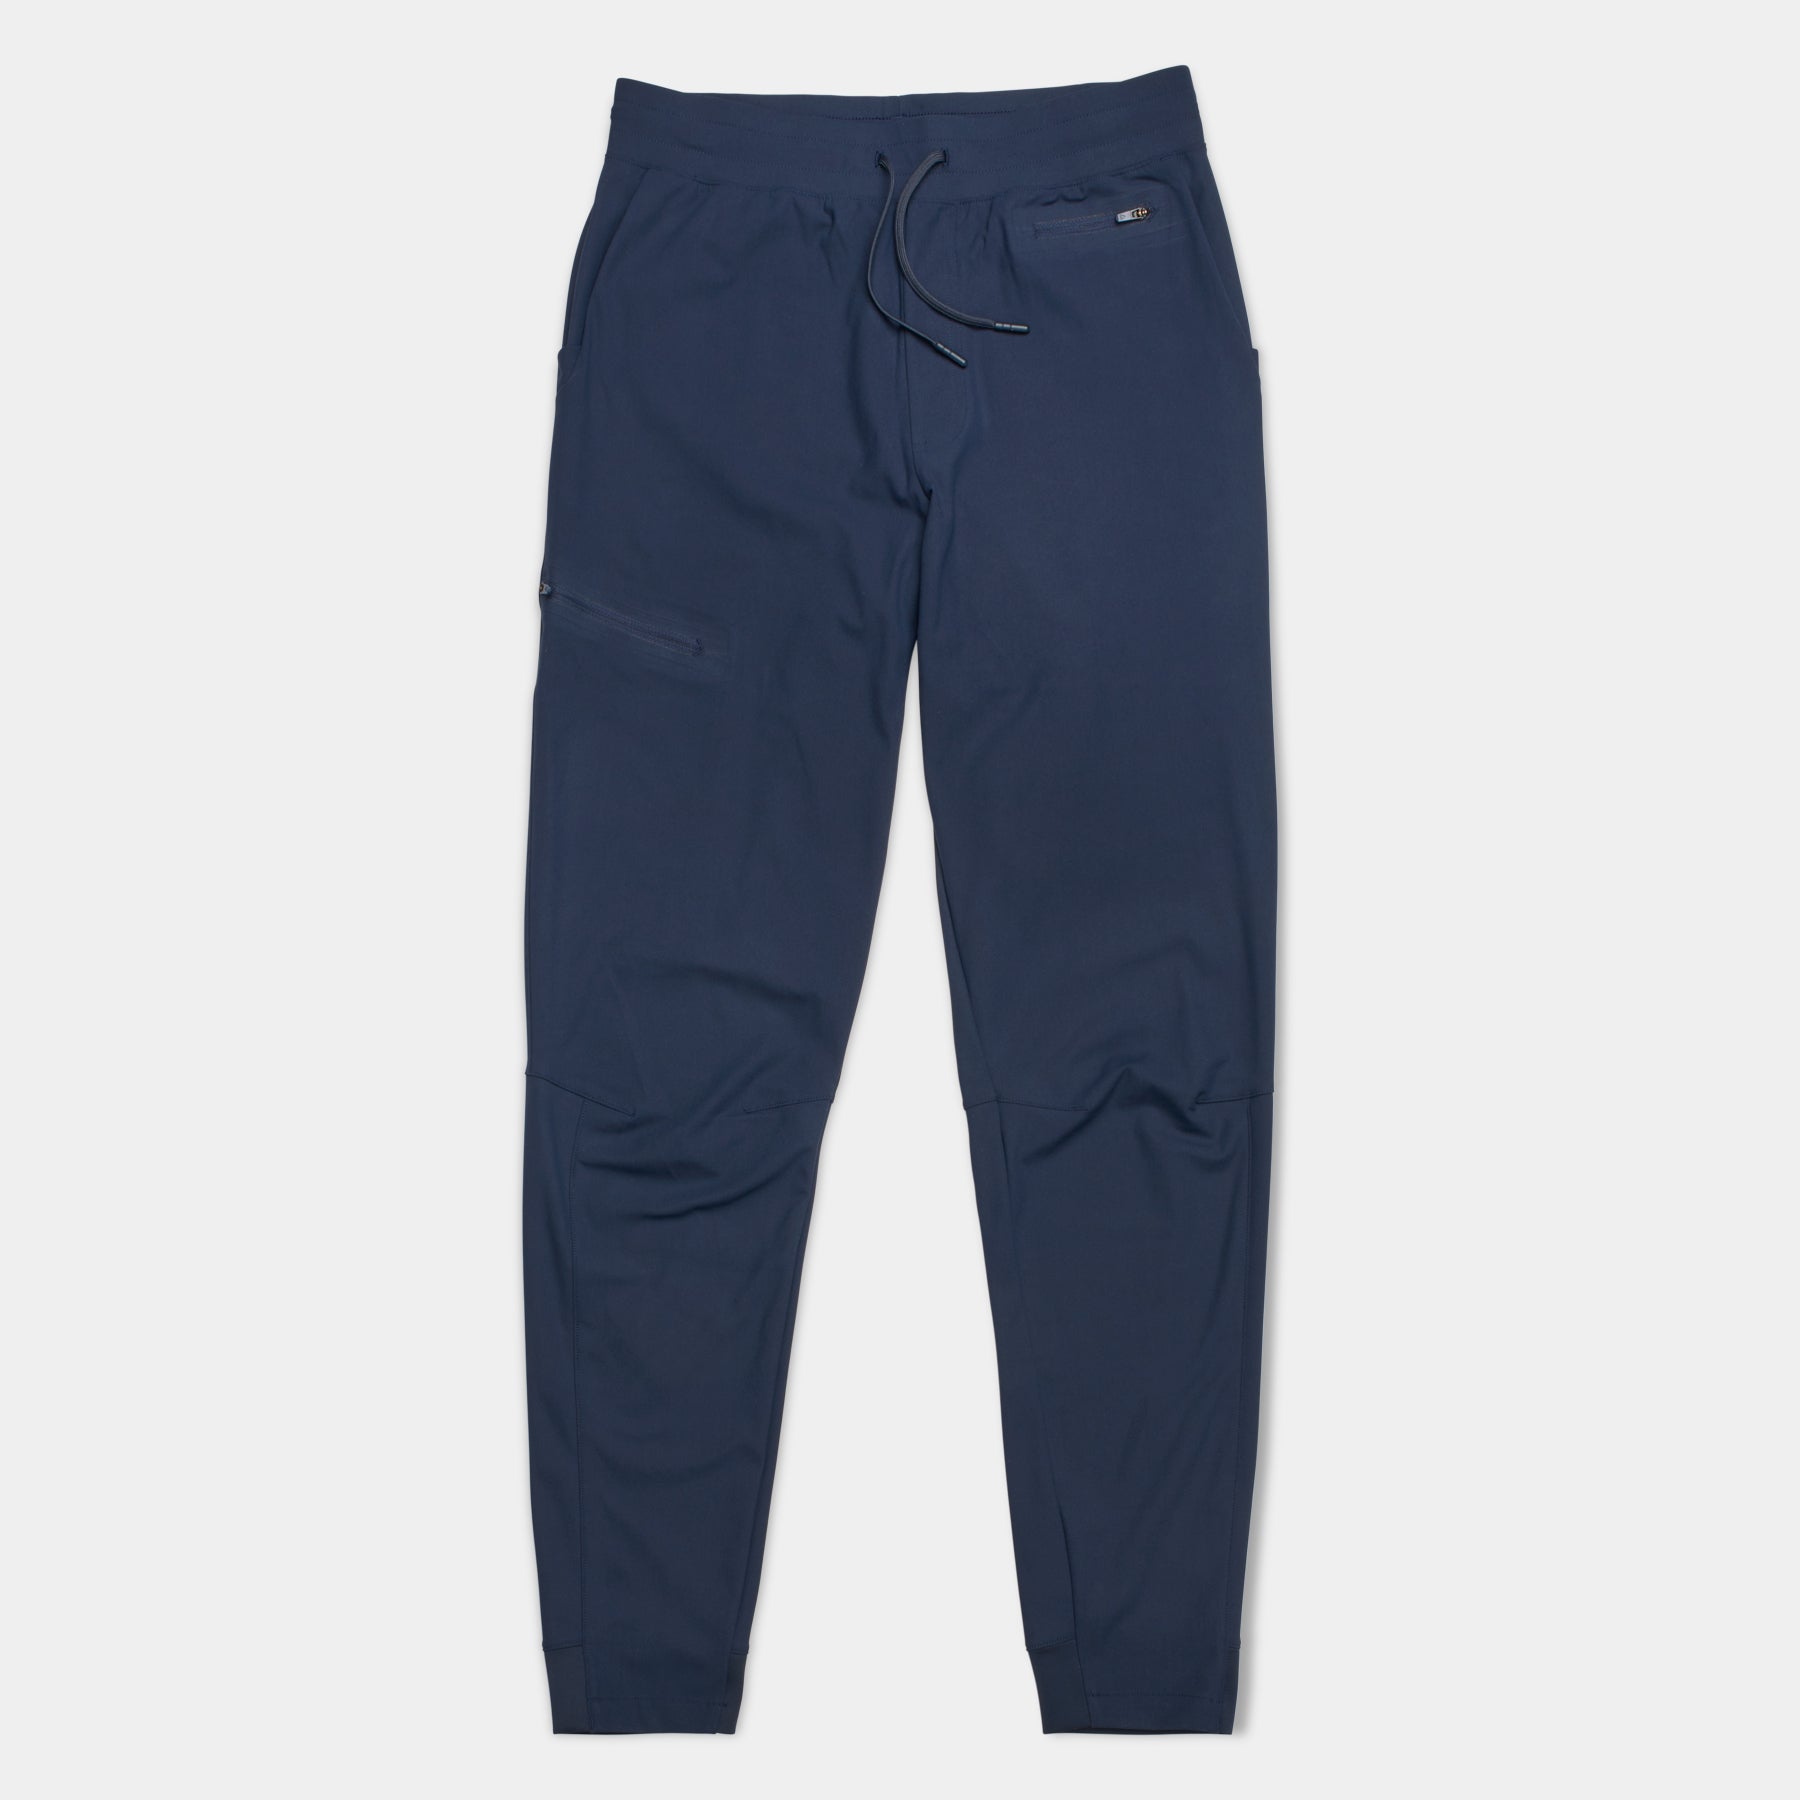 The Outset Jogger